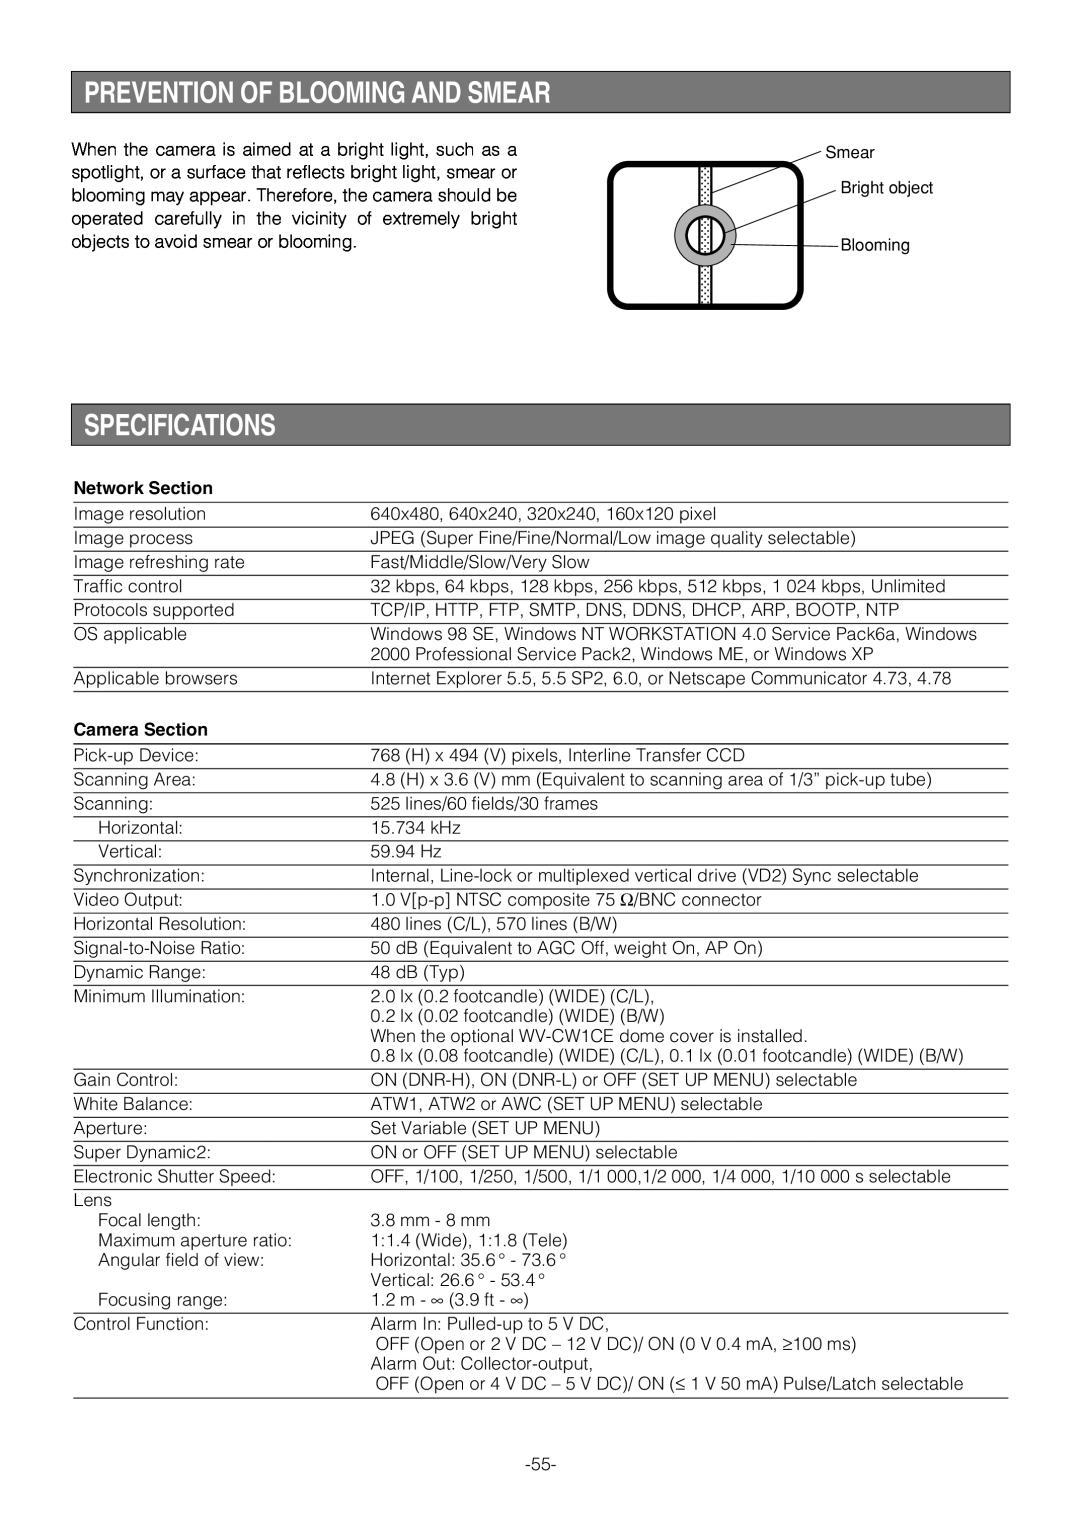 Pantech WV-NW474S manual Prevention Of Blooming And Smear, Specifications, Network Section, Camera Section 